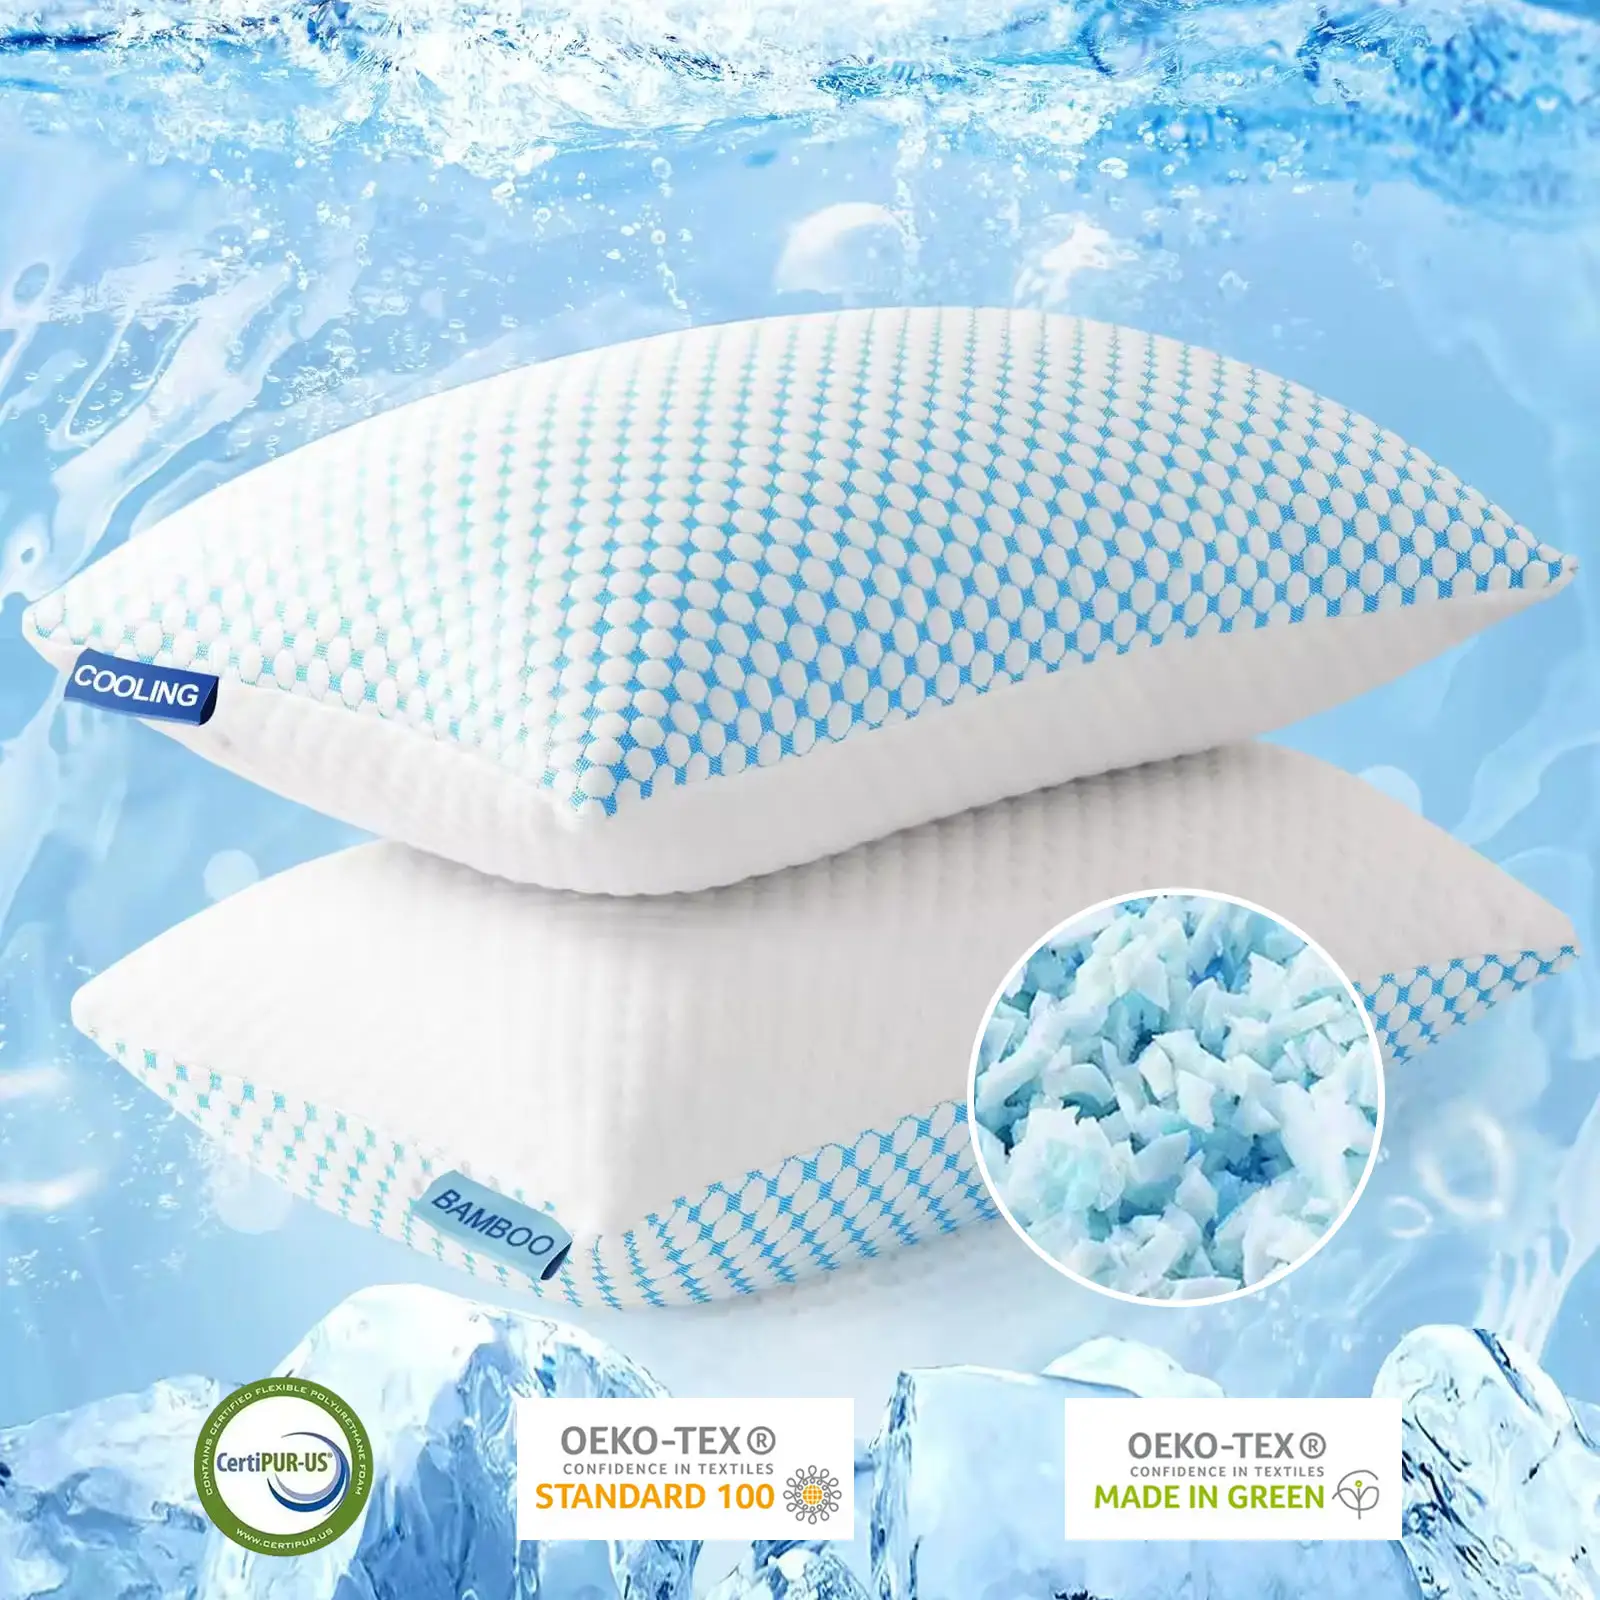 20% Ice Fiber 80% Polyester Double Side Cold Bamboo Shredded Cooling Memory Foam Pillow with Breathable Washable Removable Case